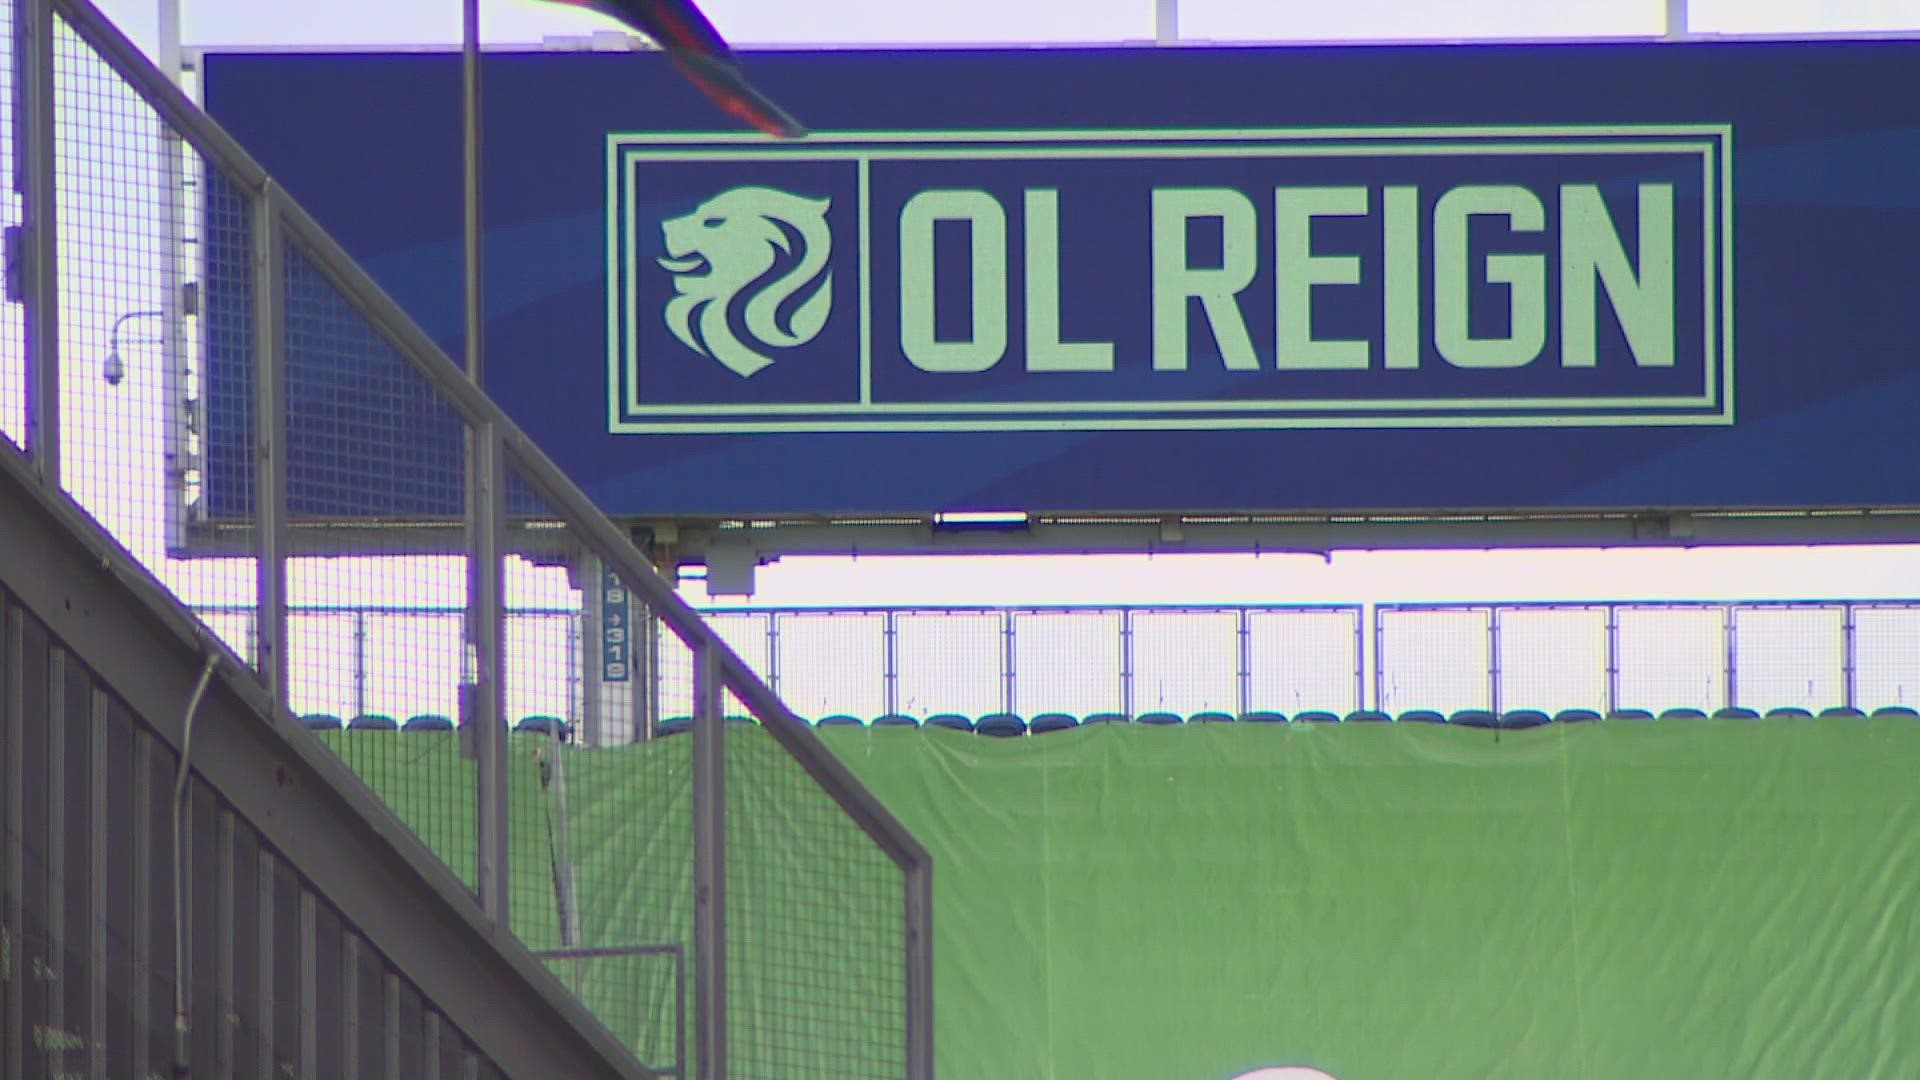 OL Reign announced the move back to Seattle and specifically, Lumen Field, in December after a tumultuous three-season run at Tacoma’s Cheney Stadium.